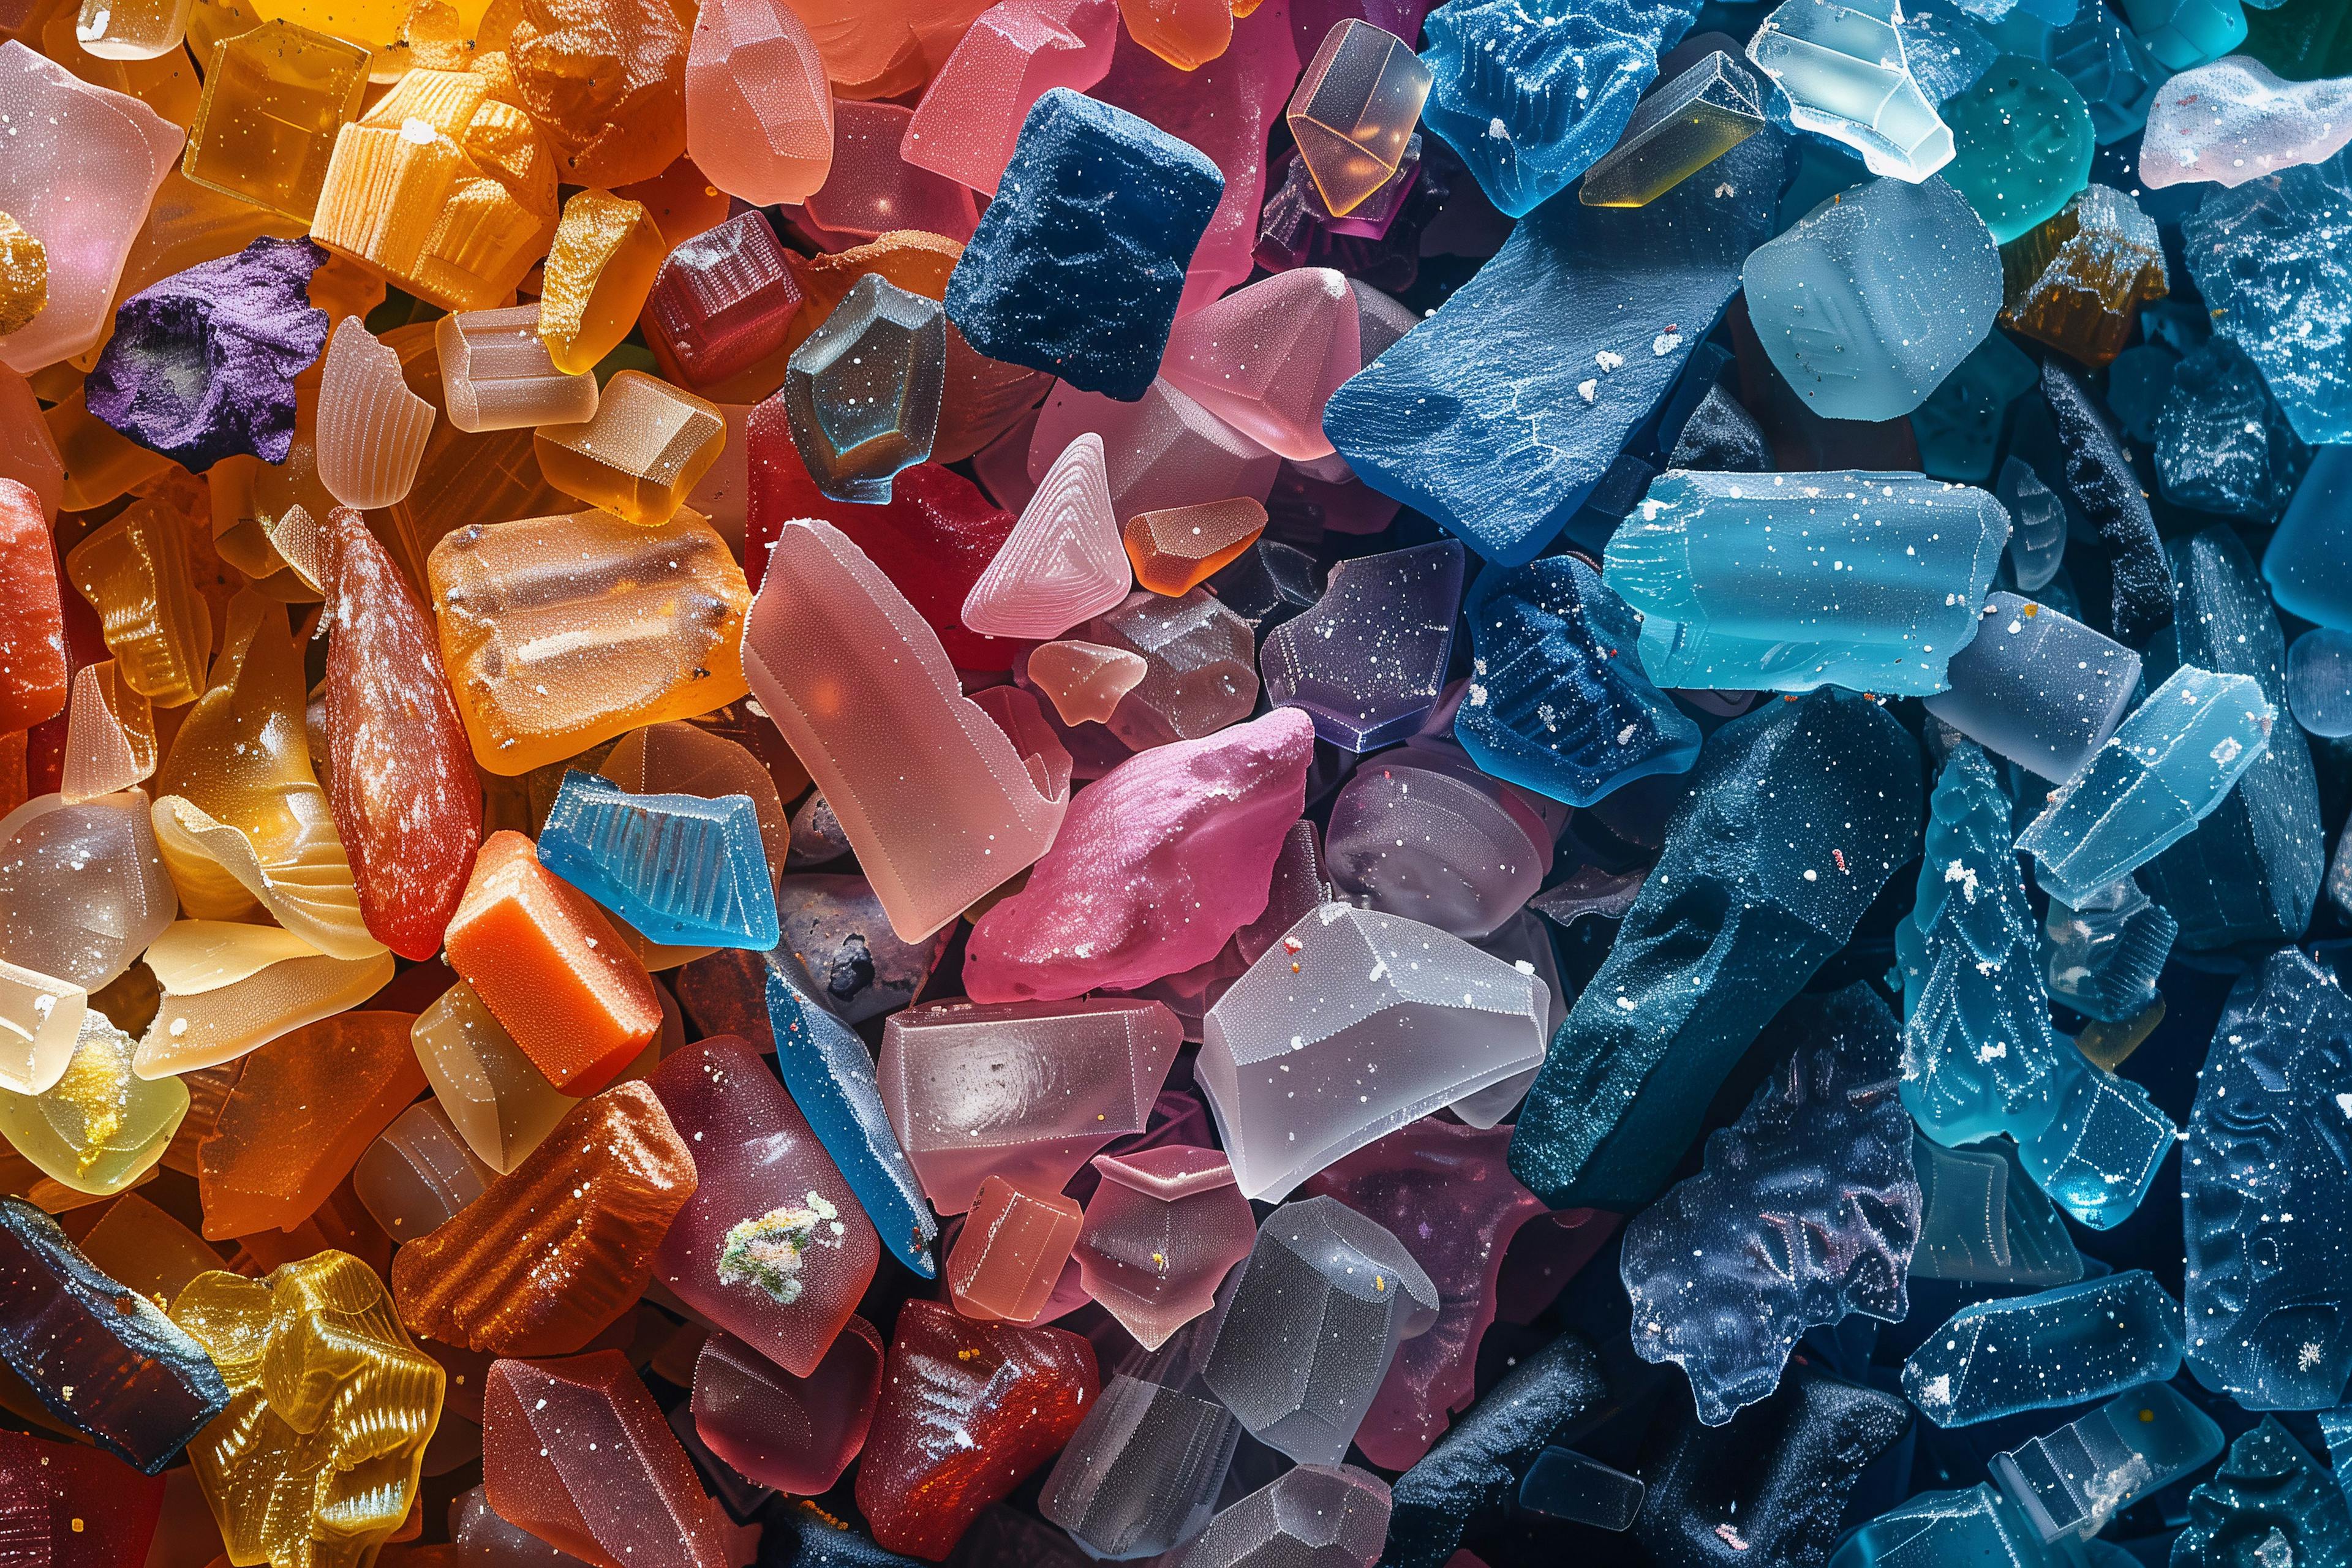 Study of microplastics under a microscope with detailed texture and color variations © AoteBearBro - stock.adobe.com